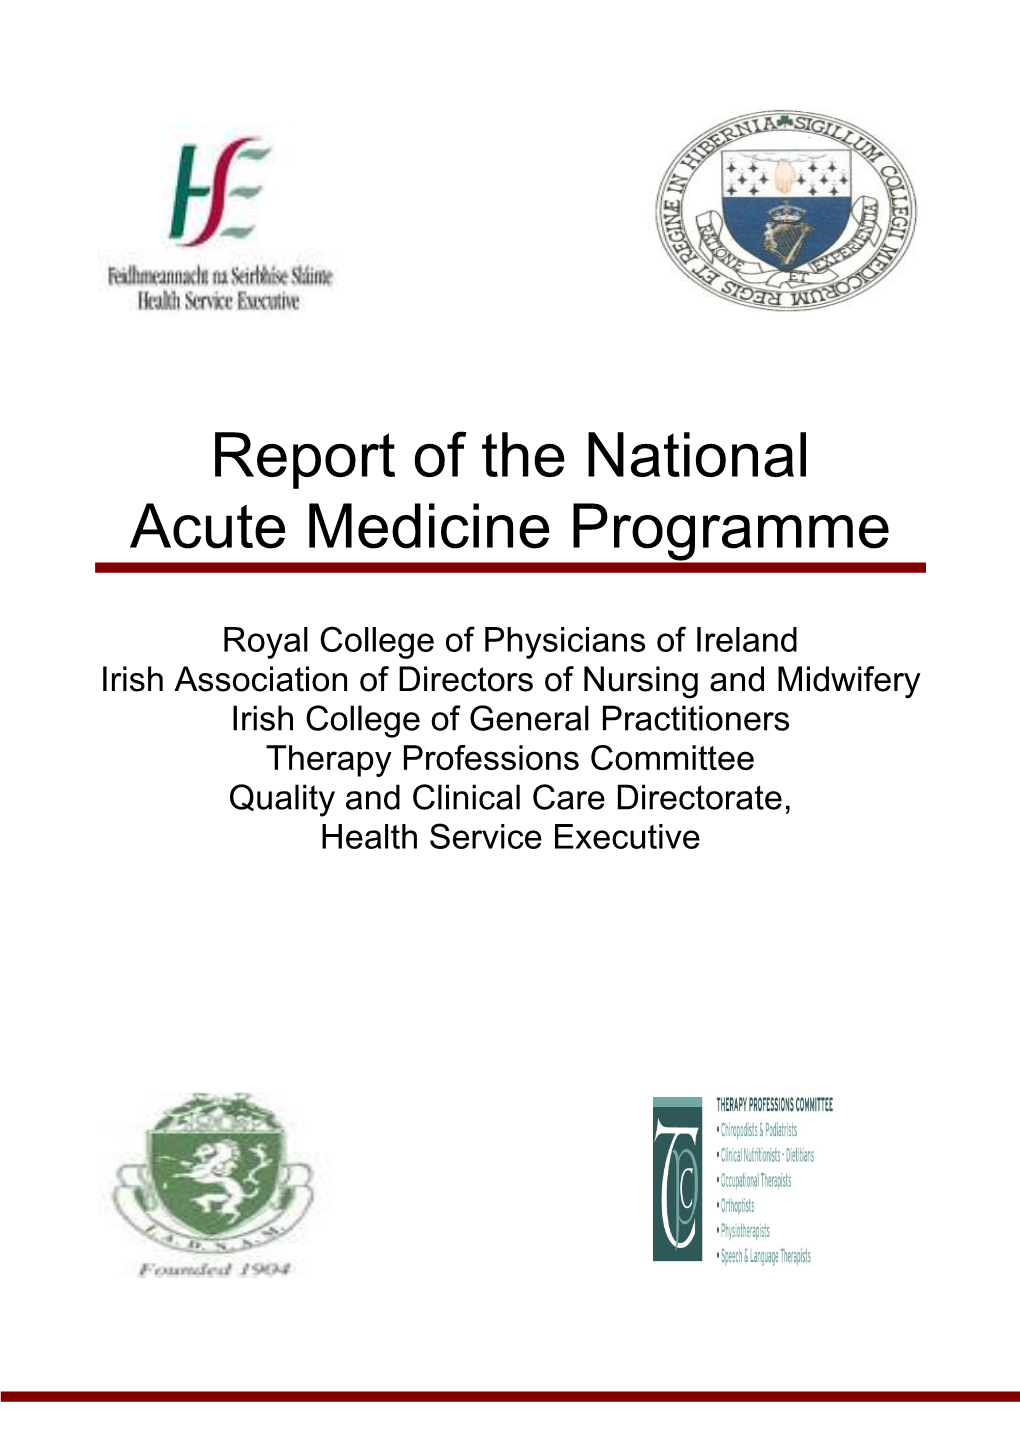 Report of the National Acute Medicine Programme